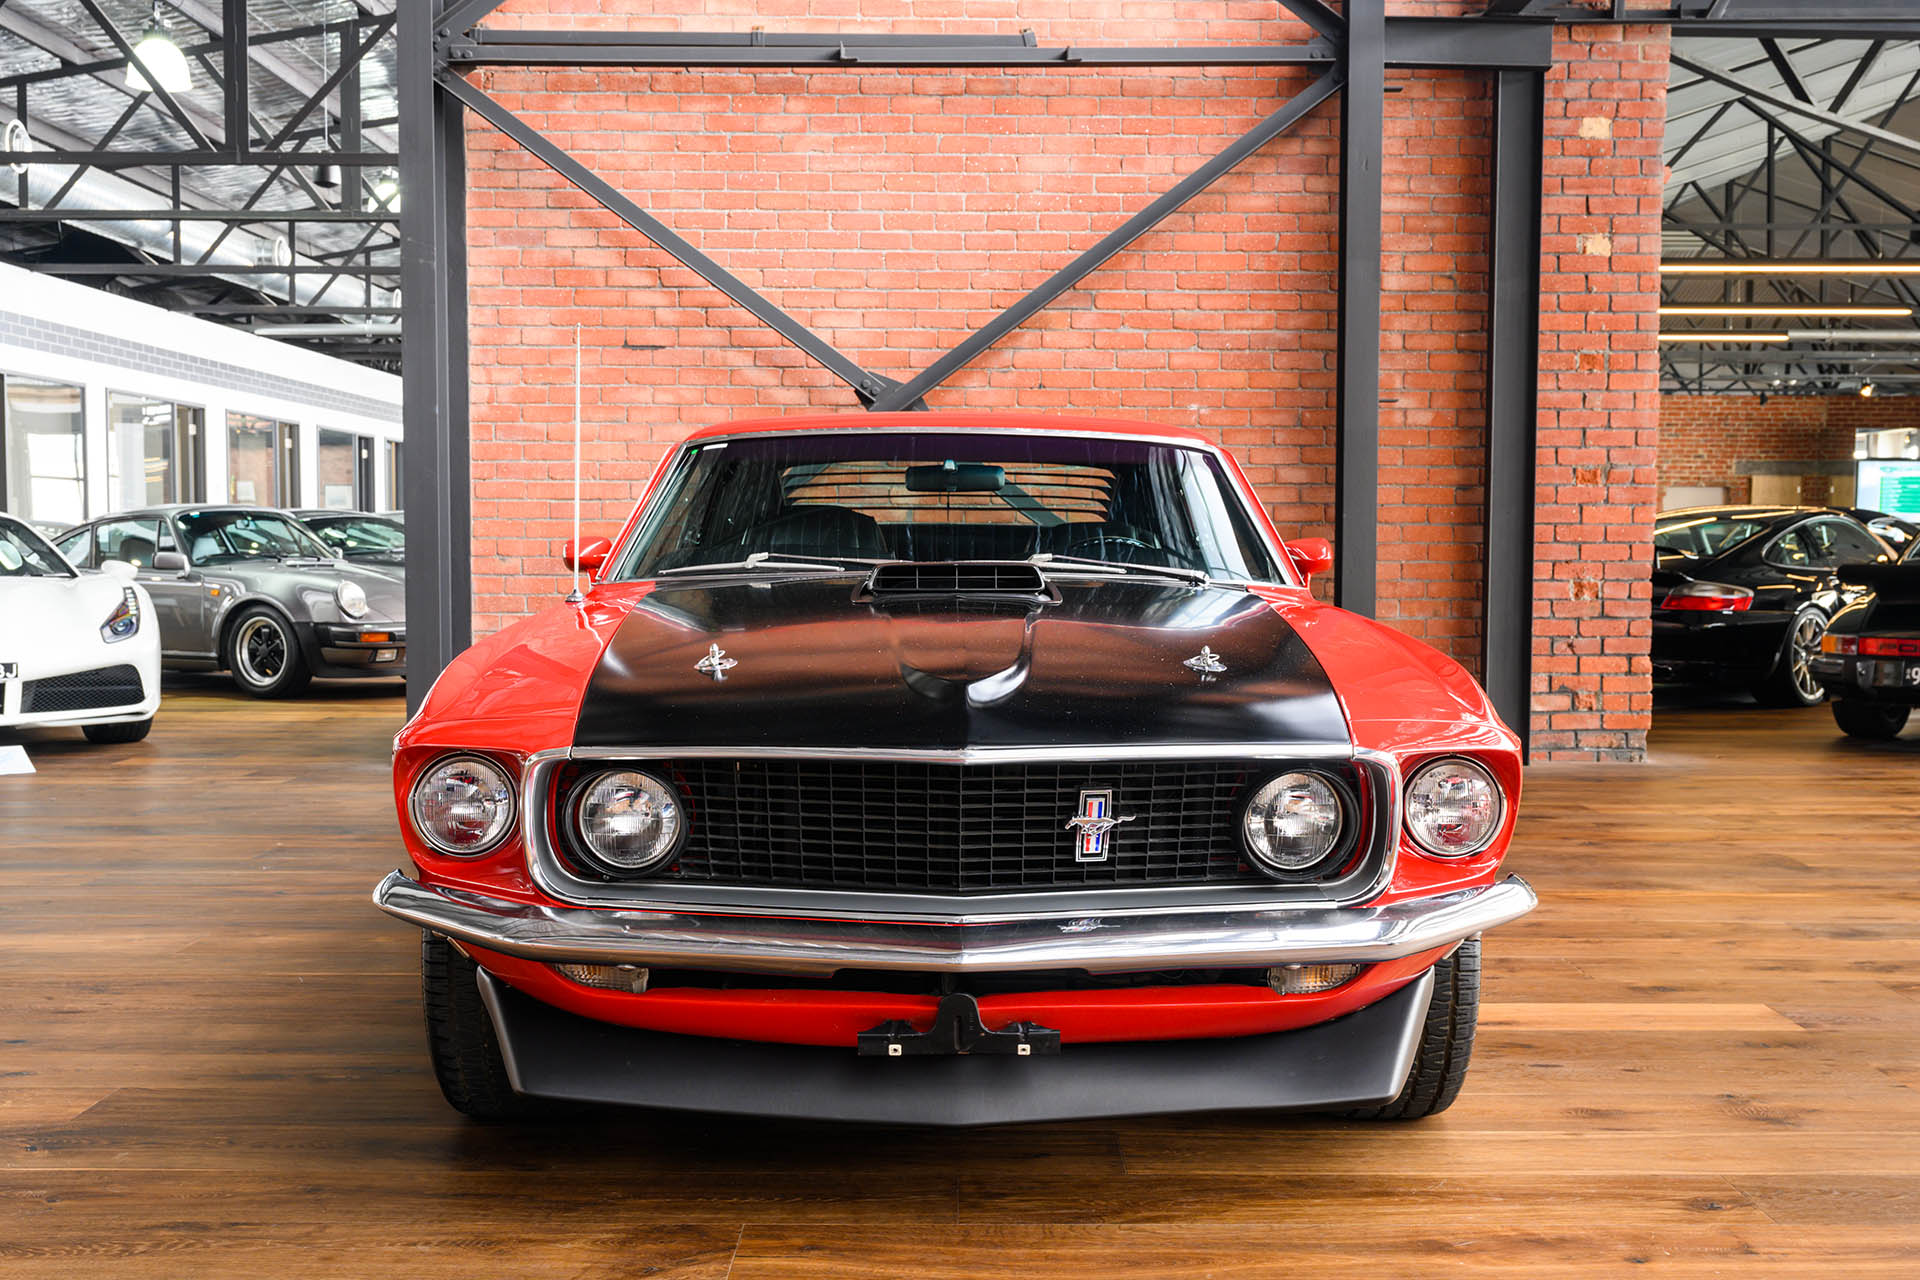 1969 Ford Mustang Mach 1 428 Cobra Jet - Richmonds - Classic and ...